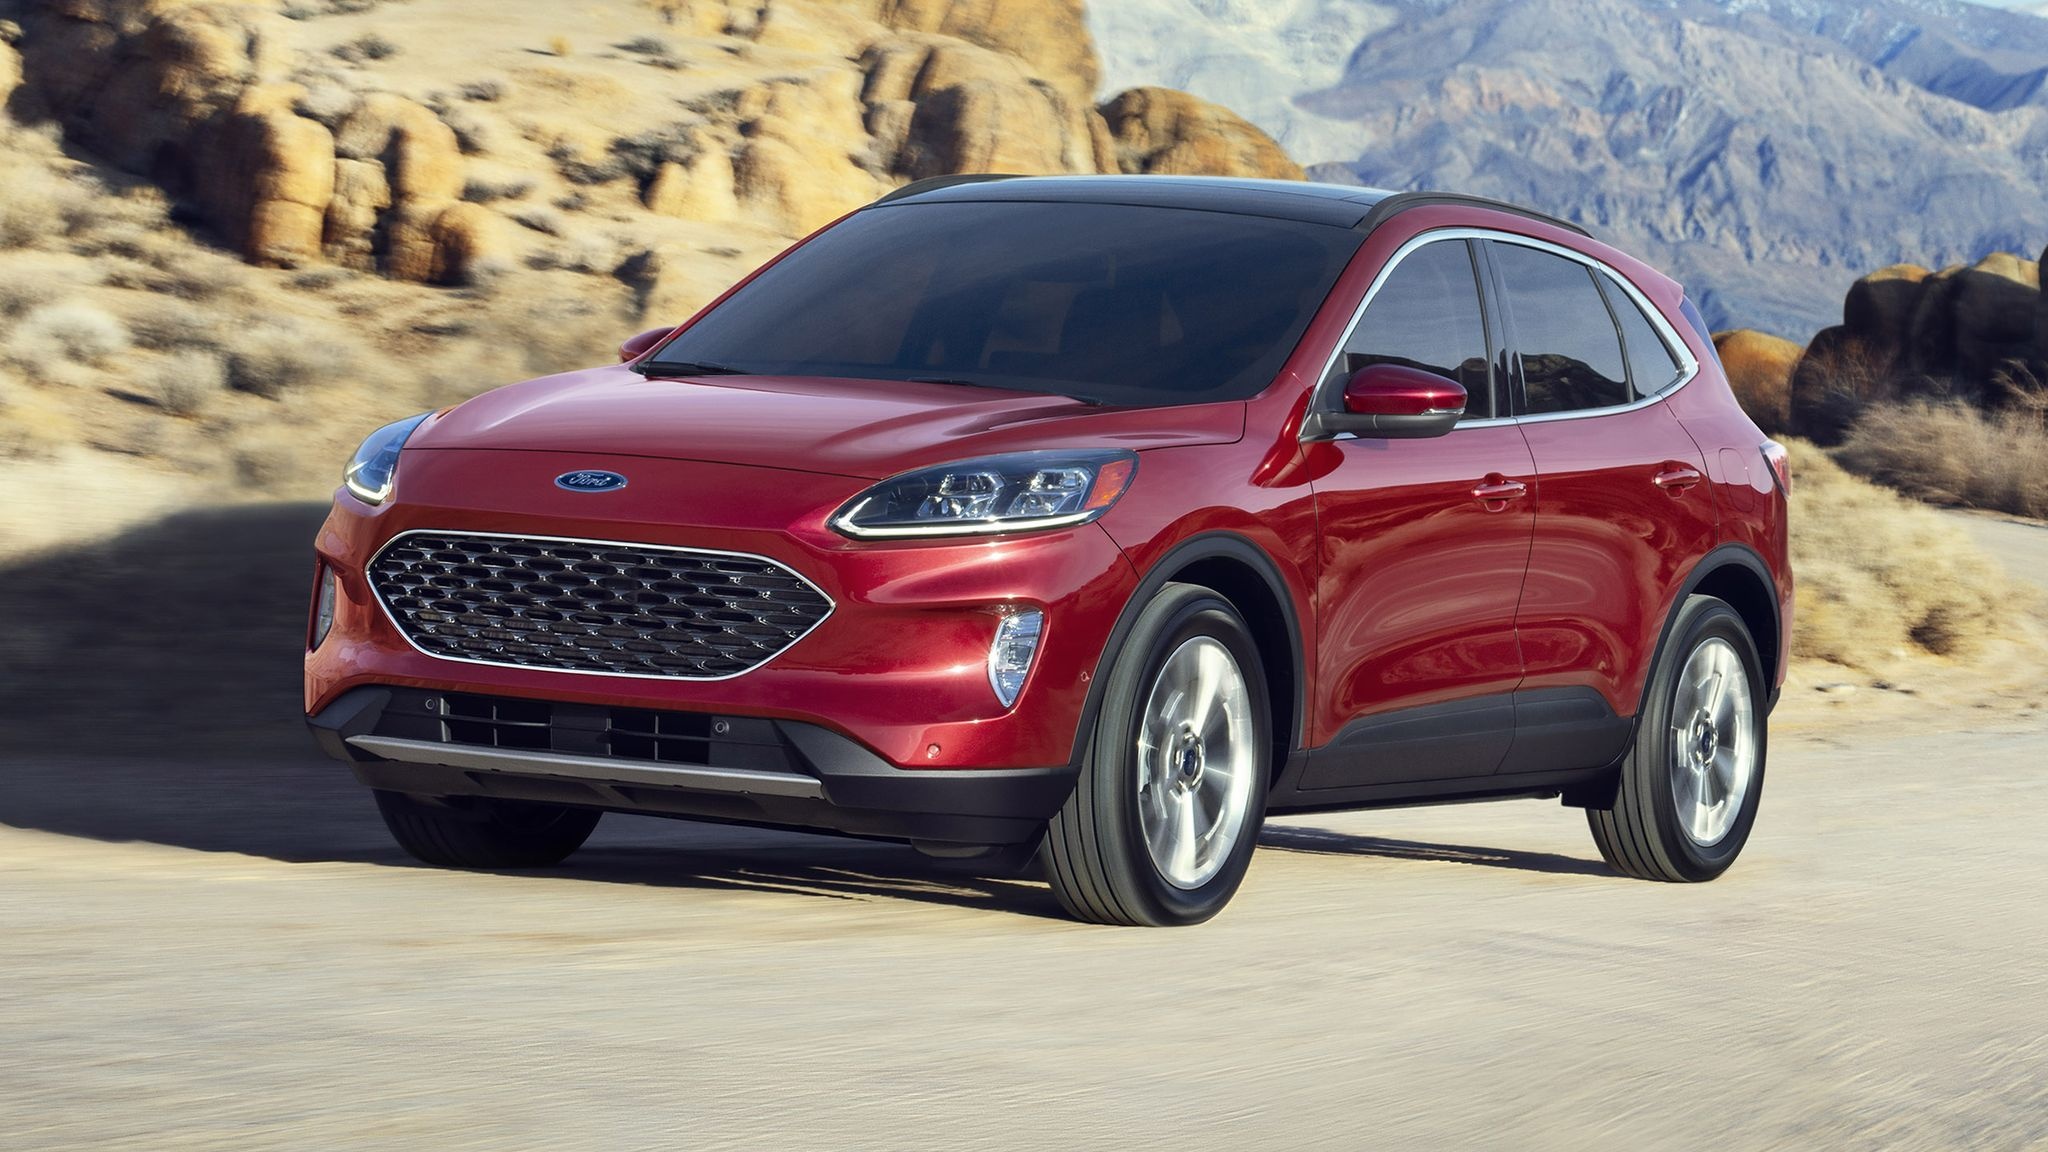 Ford Escape, Comparison with Chevy Trailblazer, Specs and features, Wendle Ford Sales Blog, 2050x1160 HD Desktop